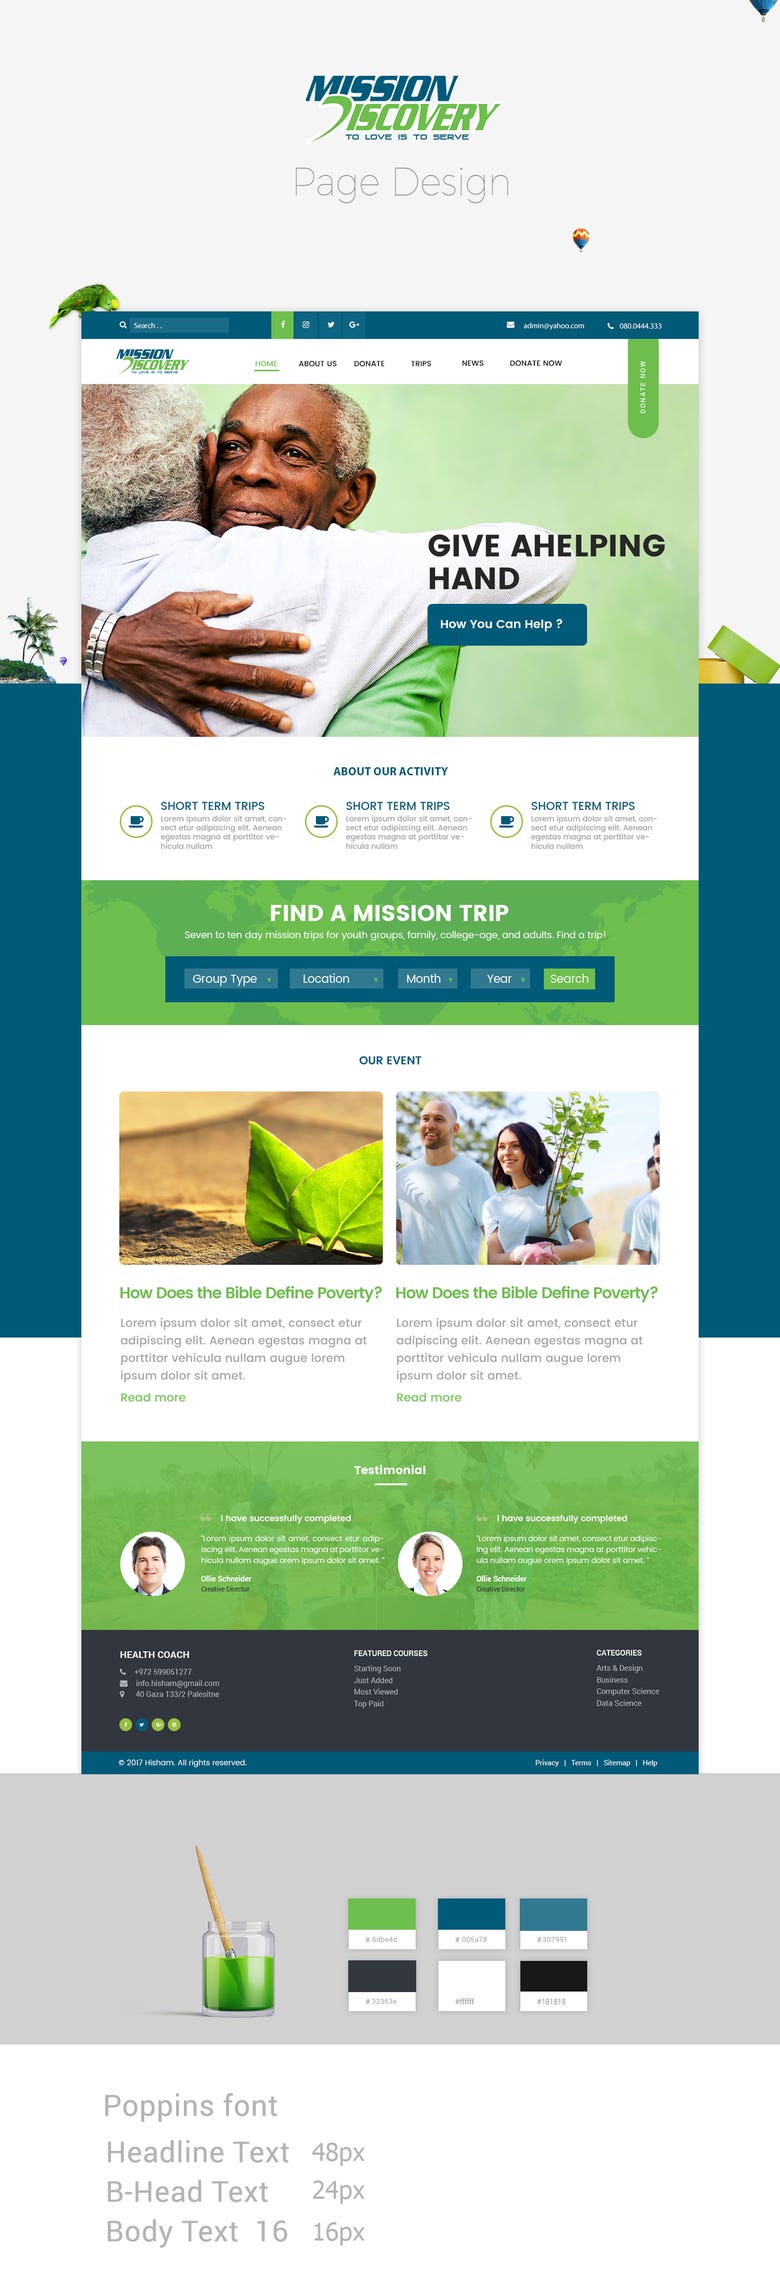 MISSION DISCOVERY WEBSITE